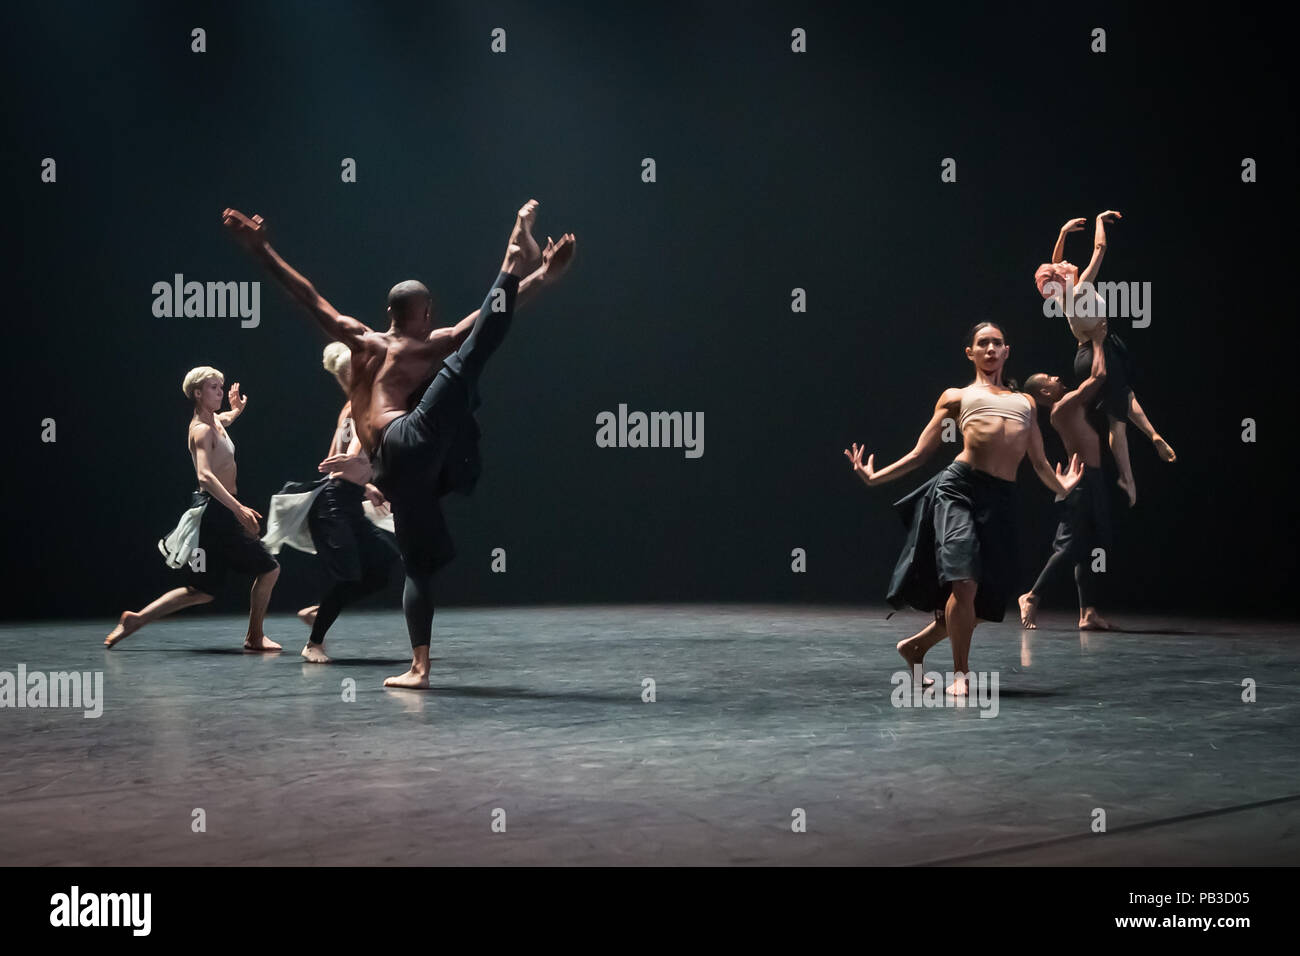 London, UK. 26th July 2018. 'Autobiography' contemporary dance performance by Company Wayne McGregor returns to Sadler's Wells theatre. McGregor's choreography presents and abstract meditation on aspects of self, life, writing and remembered pasts and speculative futures. Credit: Guy Corbishley/Alamy Live News Stock Photo